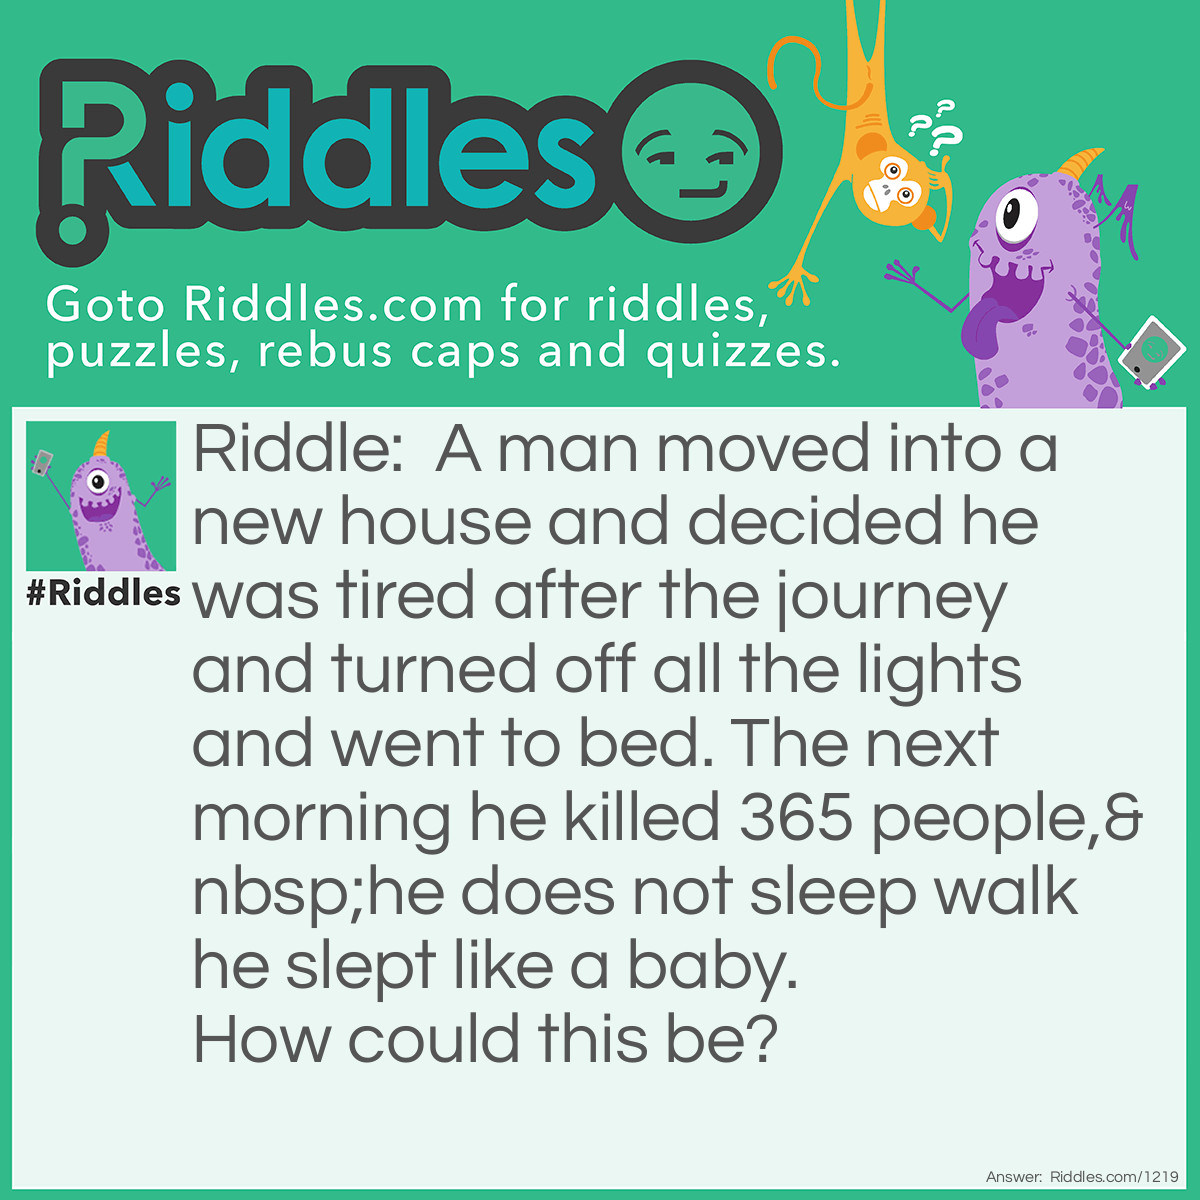 Riddle: A man moved into a new house and decided he was tired after the journey and turned off all the lights and went to bed. The next morning he killed 365 people, he does not sleep walk he slept like a baby.  How could this be? Answer: He lived in a light house.